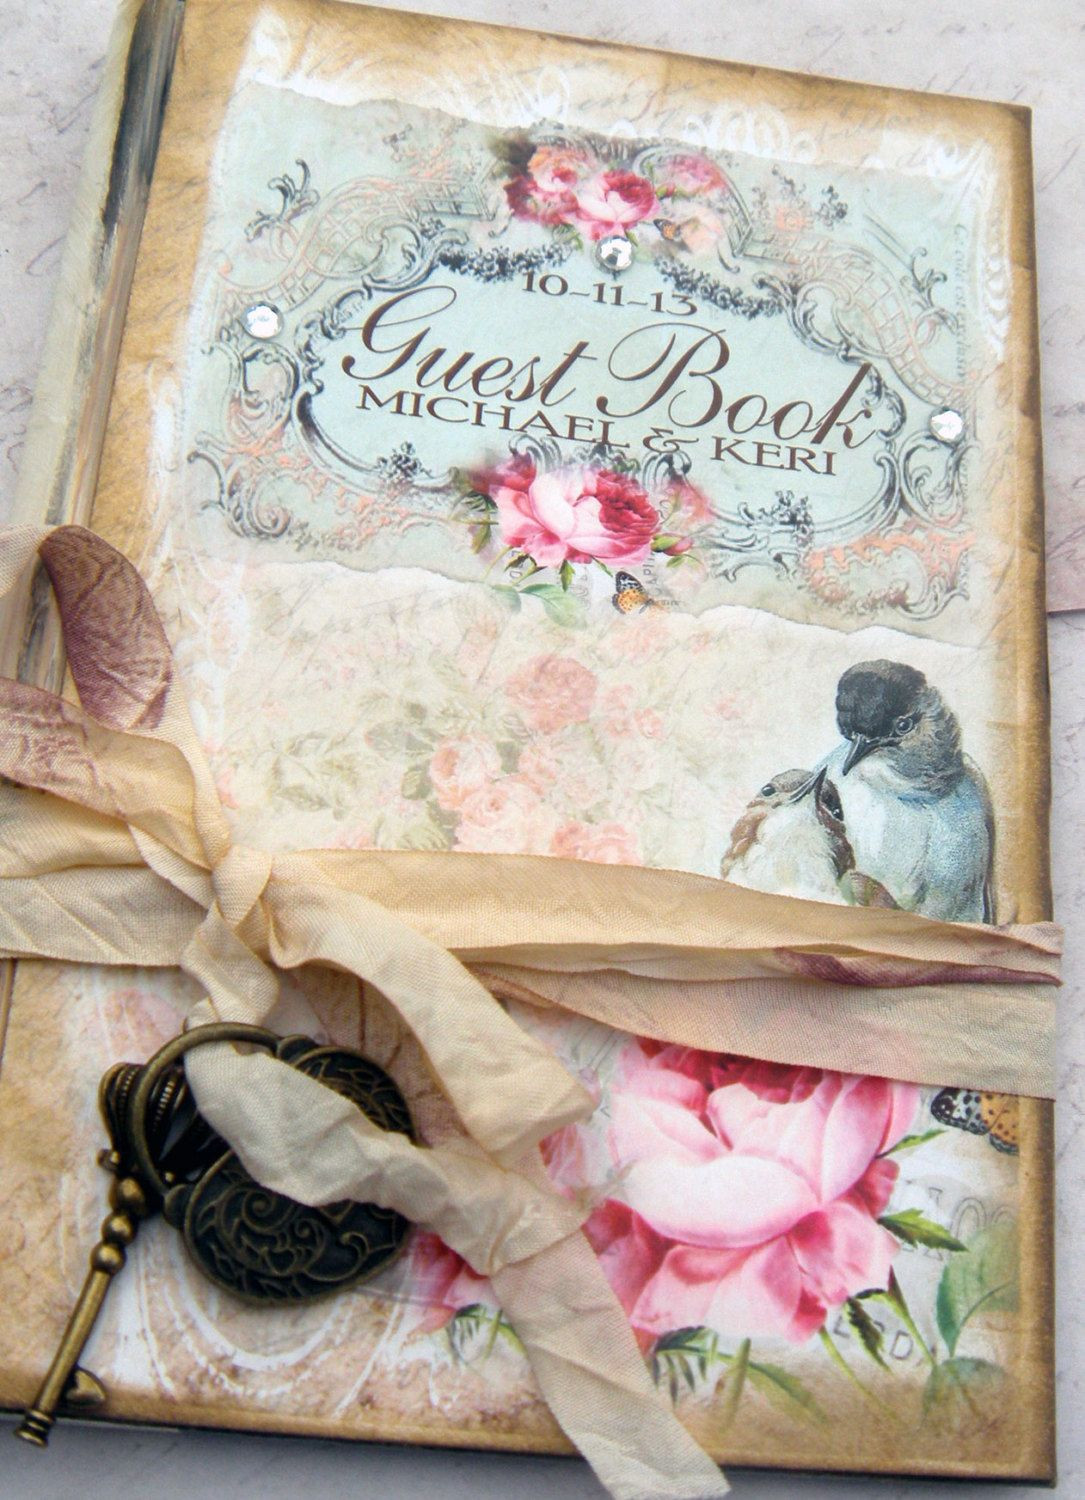 Shabby Chic Wedding Guest Book
 Wedding Guest Book in Shabby Chic Vintage Style love birds